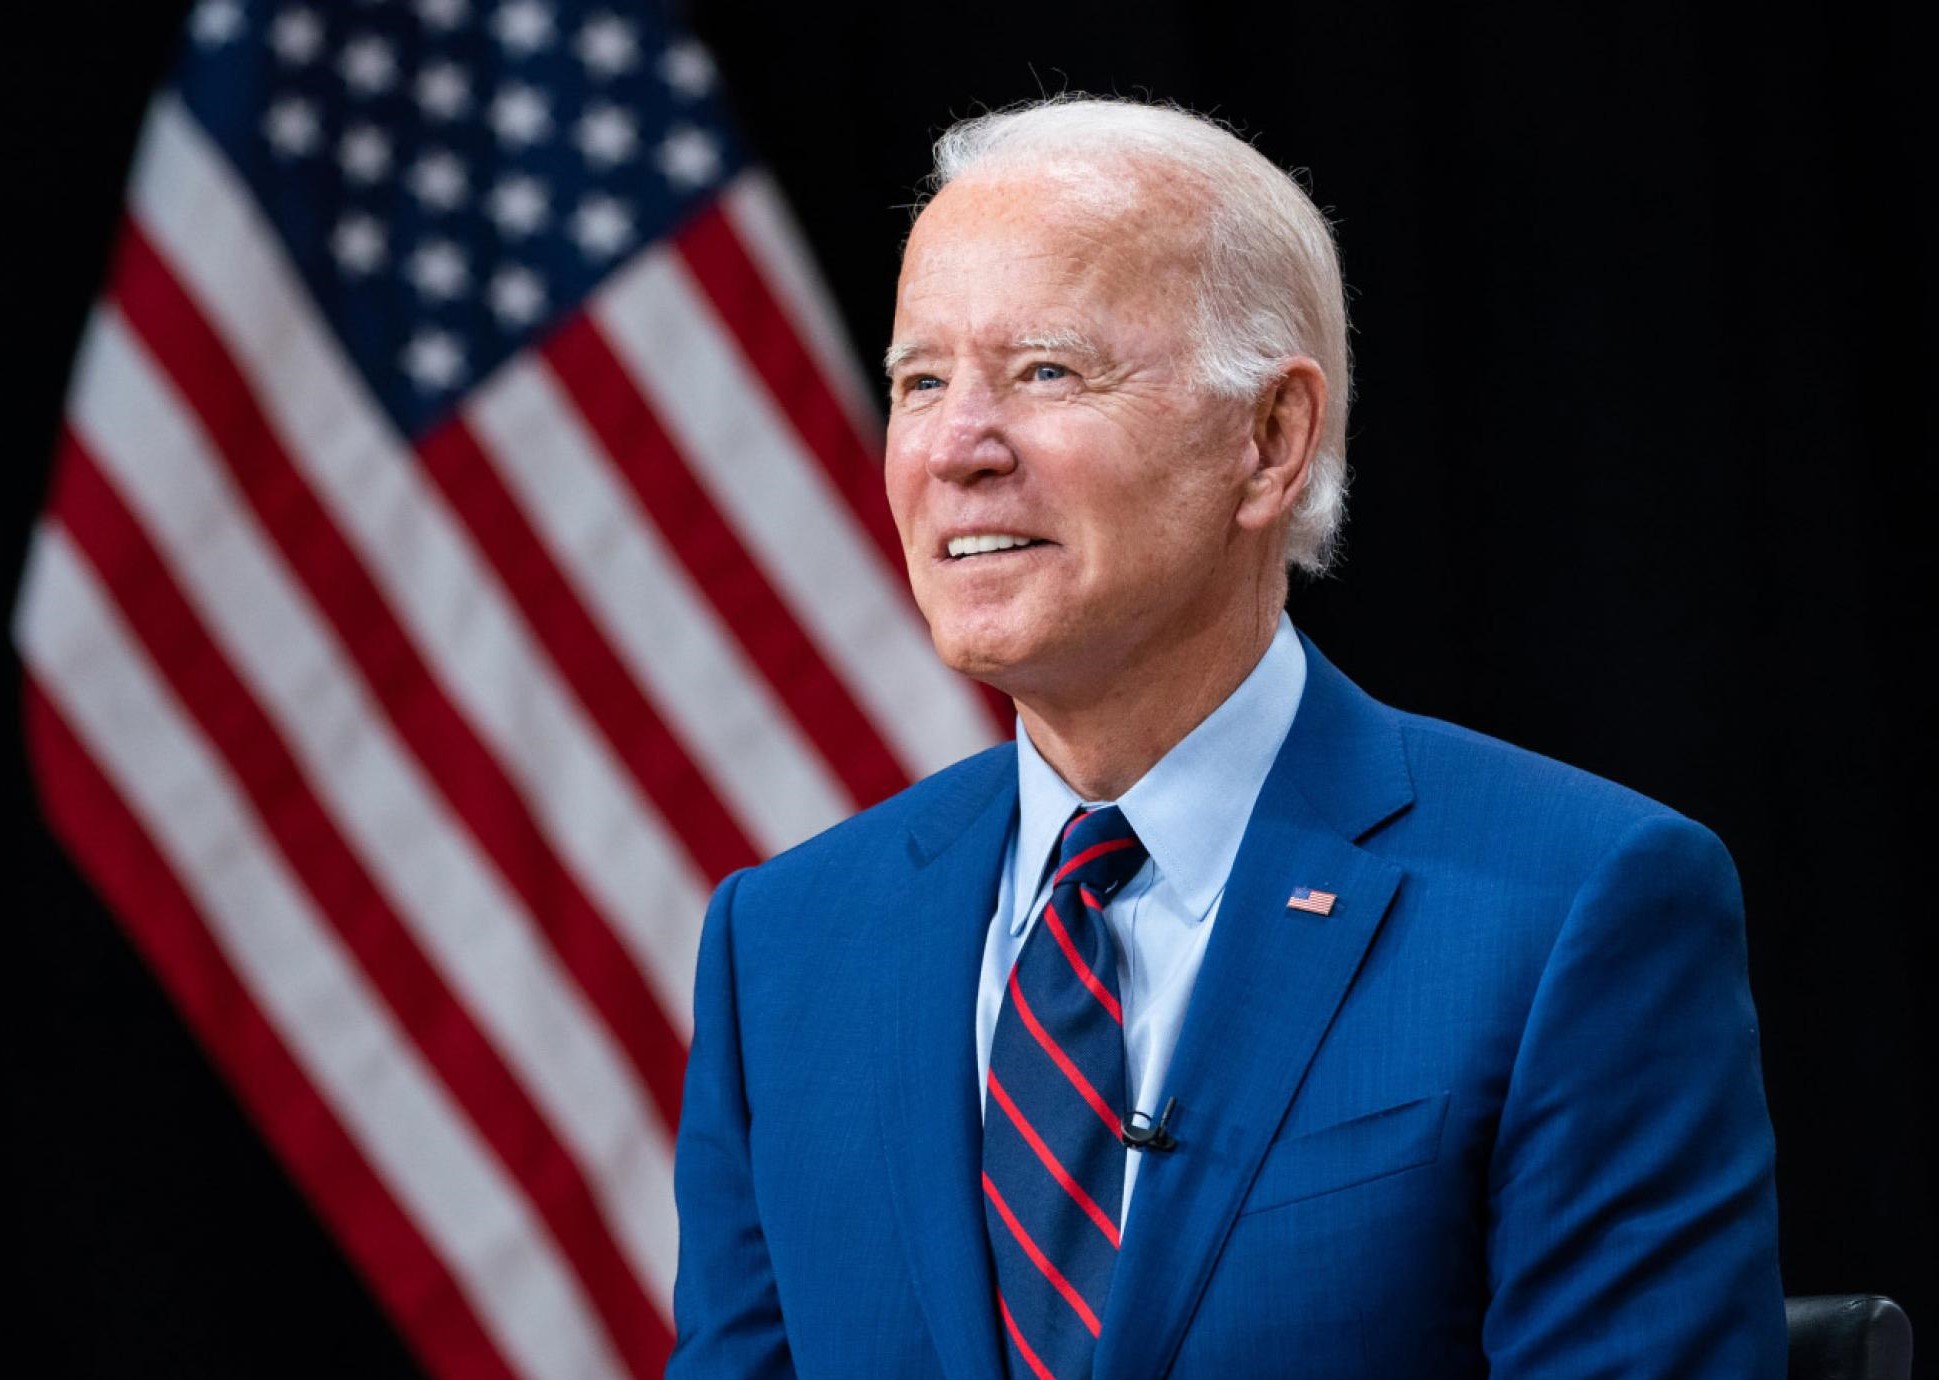 New York Times editorial board urges Biden to drop out of race after debate struggle